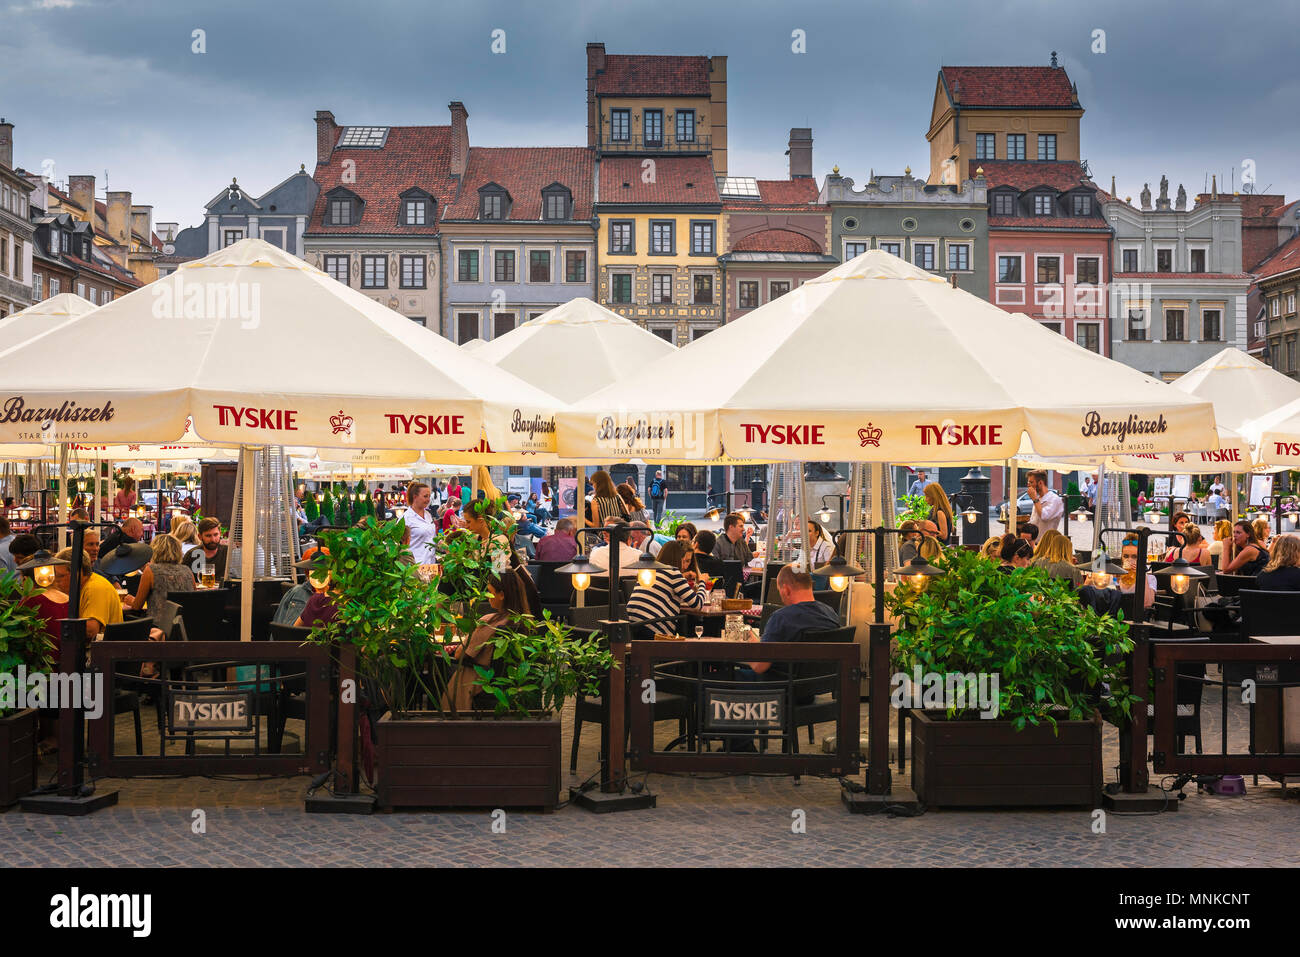 Warsaw Old Town Square, on a summer evening people dine at cafe tables in the Old Town Square in the historic Stare Miasto quarter of Warsaw, Poland. Stock Photo